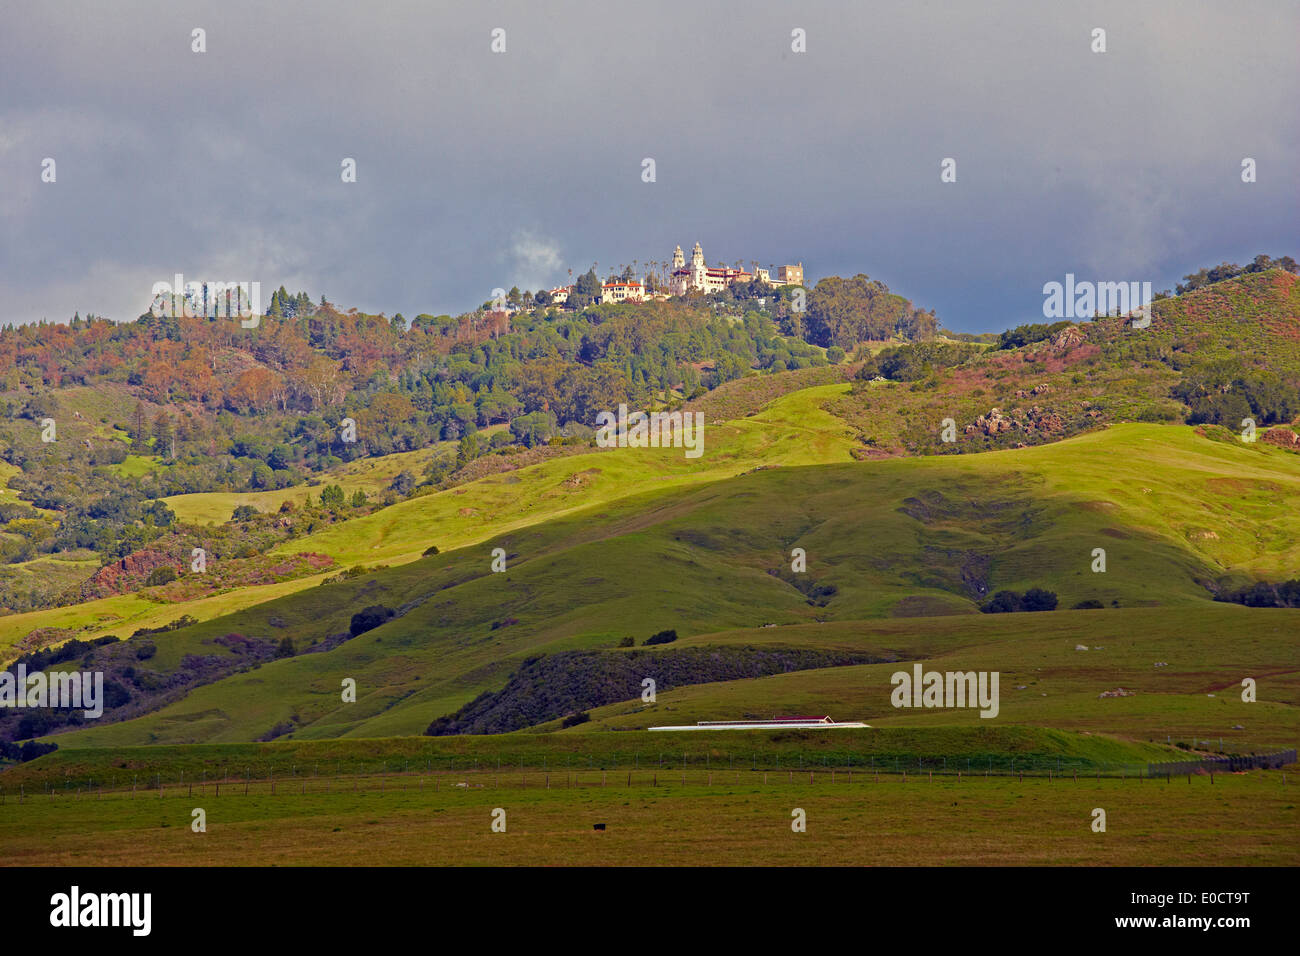 View of Hearst Castle in idyllic hilly landscape, California, USA, America Stock Photo